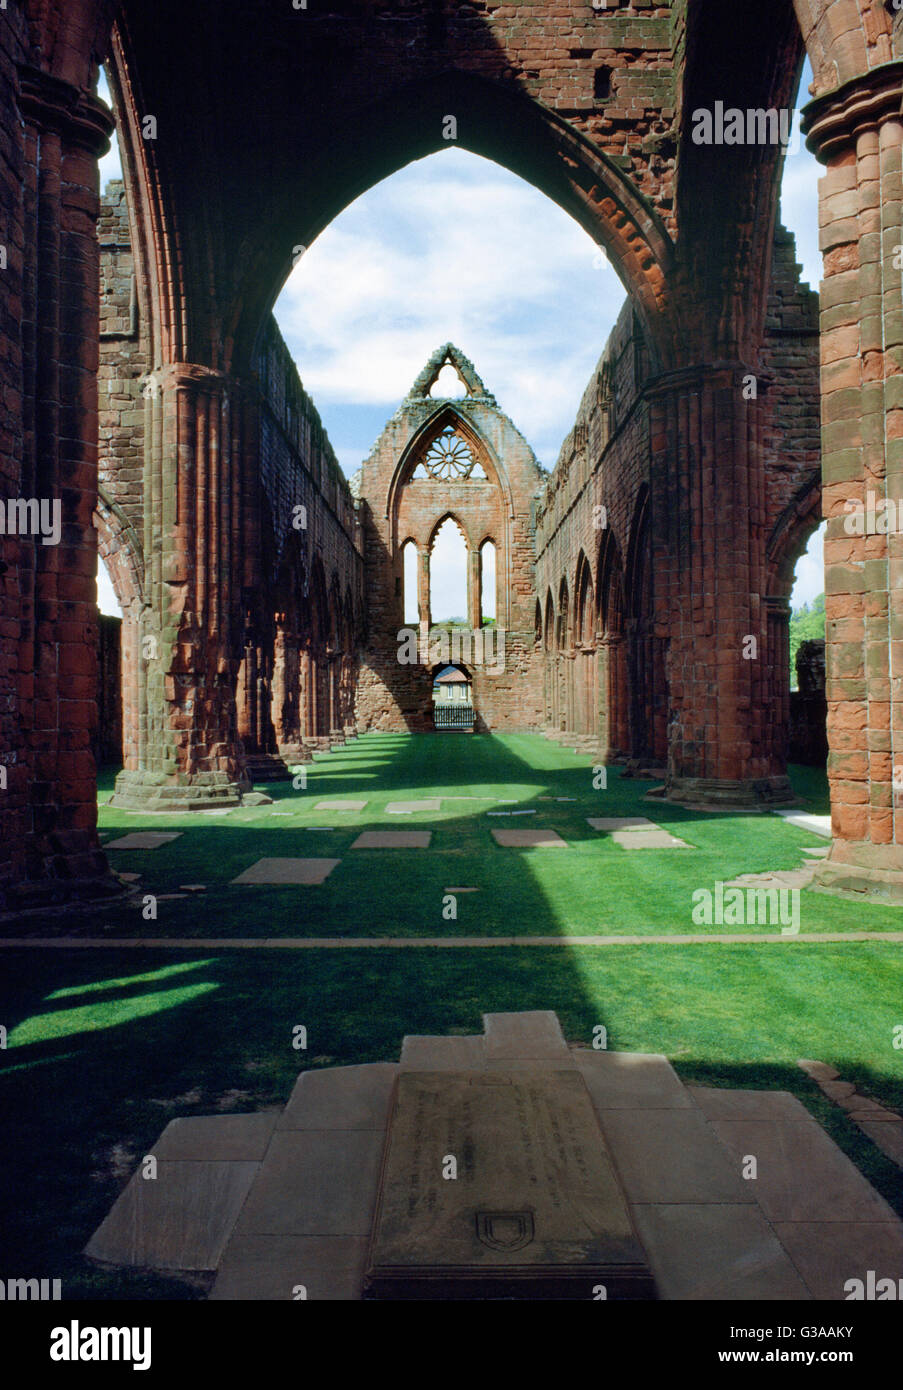 Looking W at the crossing & nave of Sweetheart Abbey church from the chancel: built of red Nithsdale sandstone. Founded by Lady Dervorgilla in 1273. Stock Photo